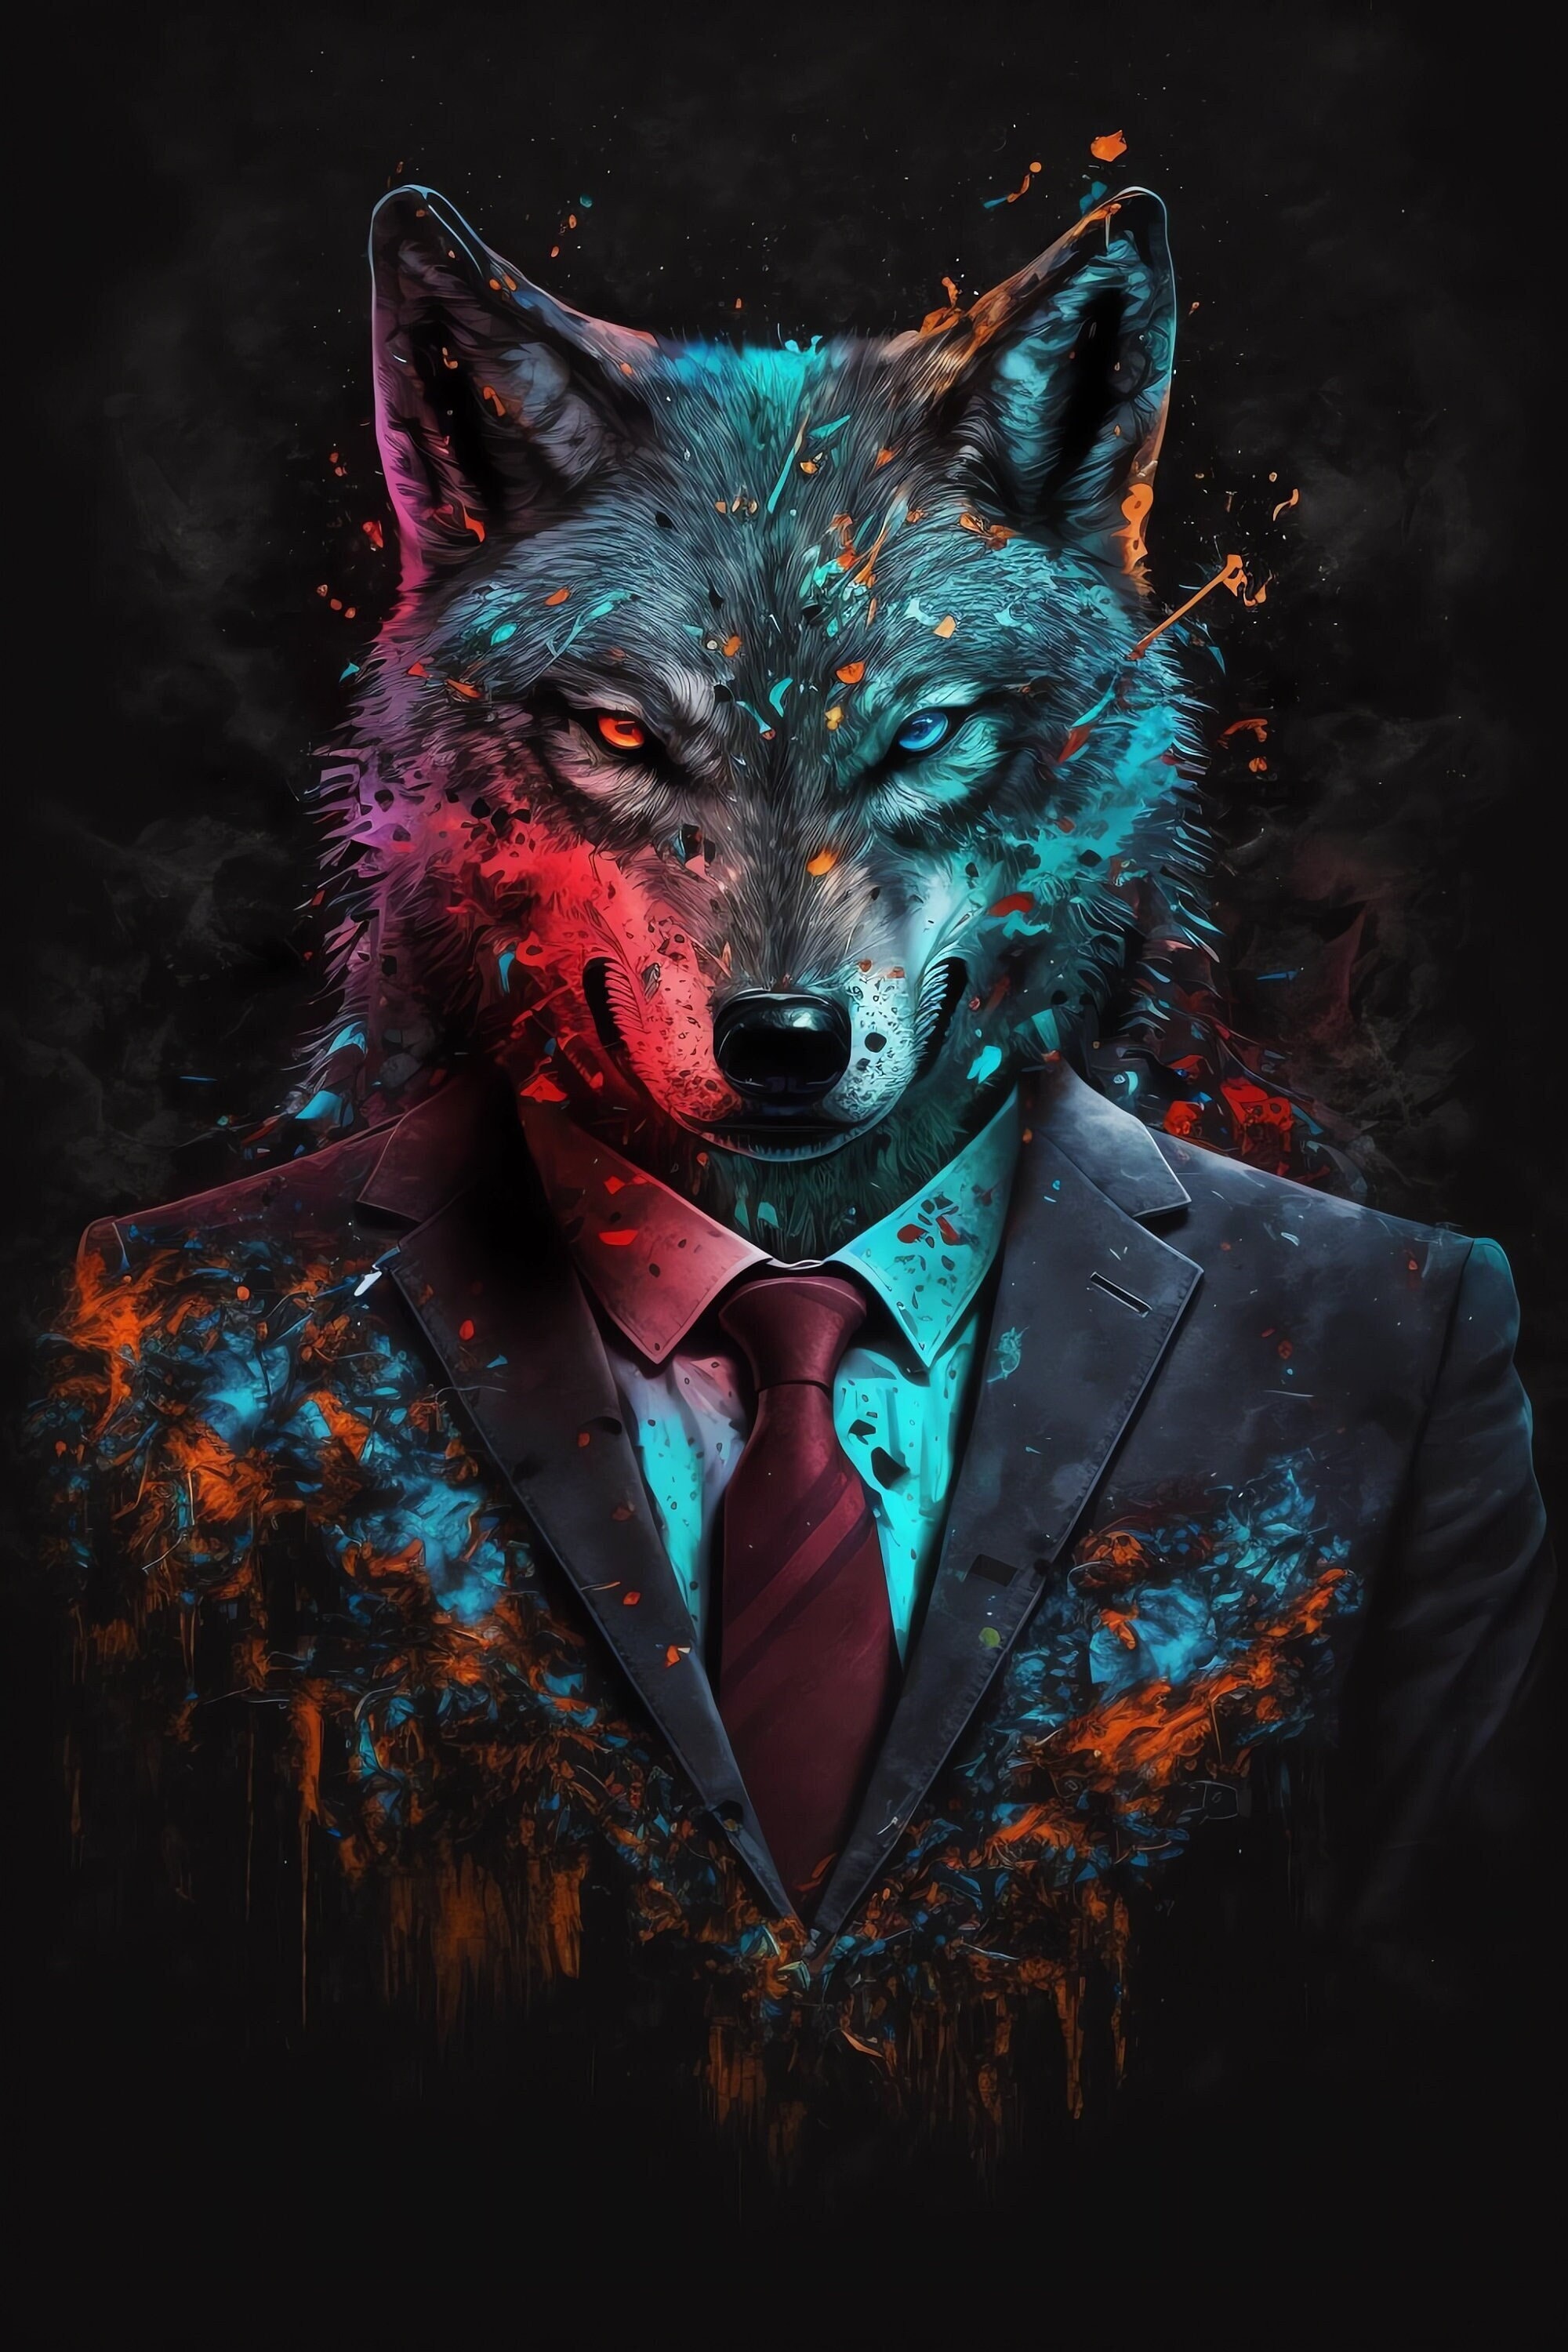 Colorful Wolf Portrait in Business Suit. Predator Poster. - Etsy